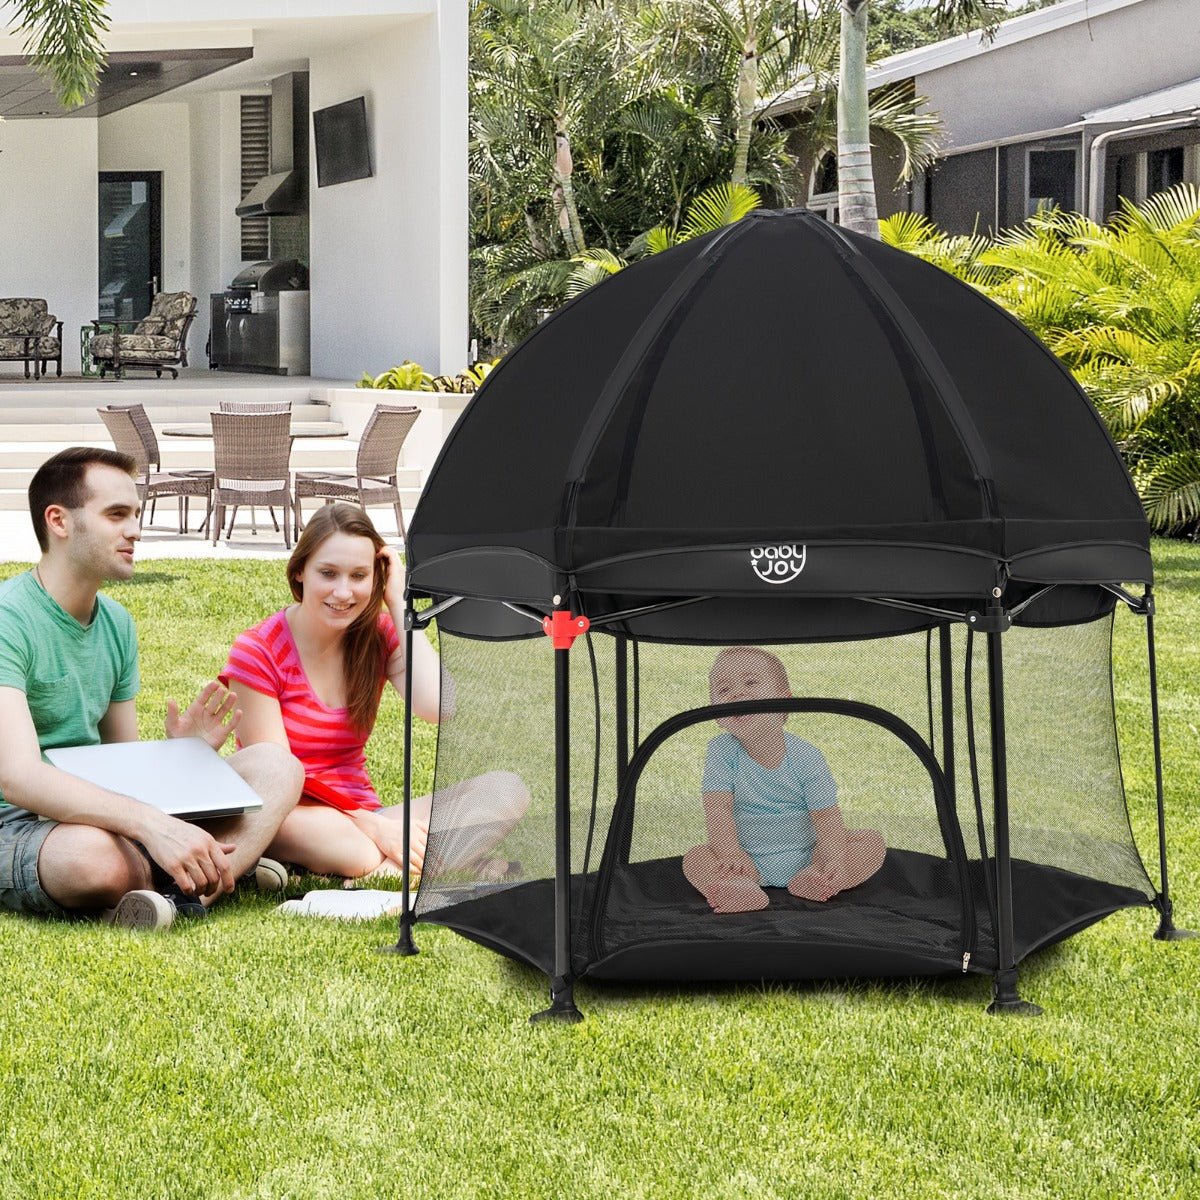 Black Portable Baby Playpen: Removable Canopy for Indoor & Outdoor Fun